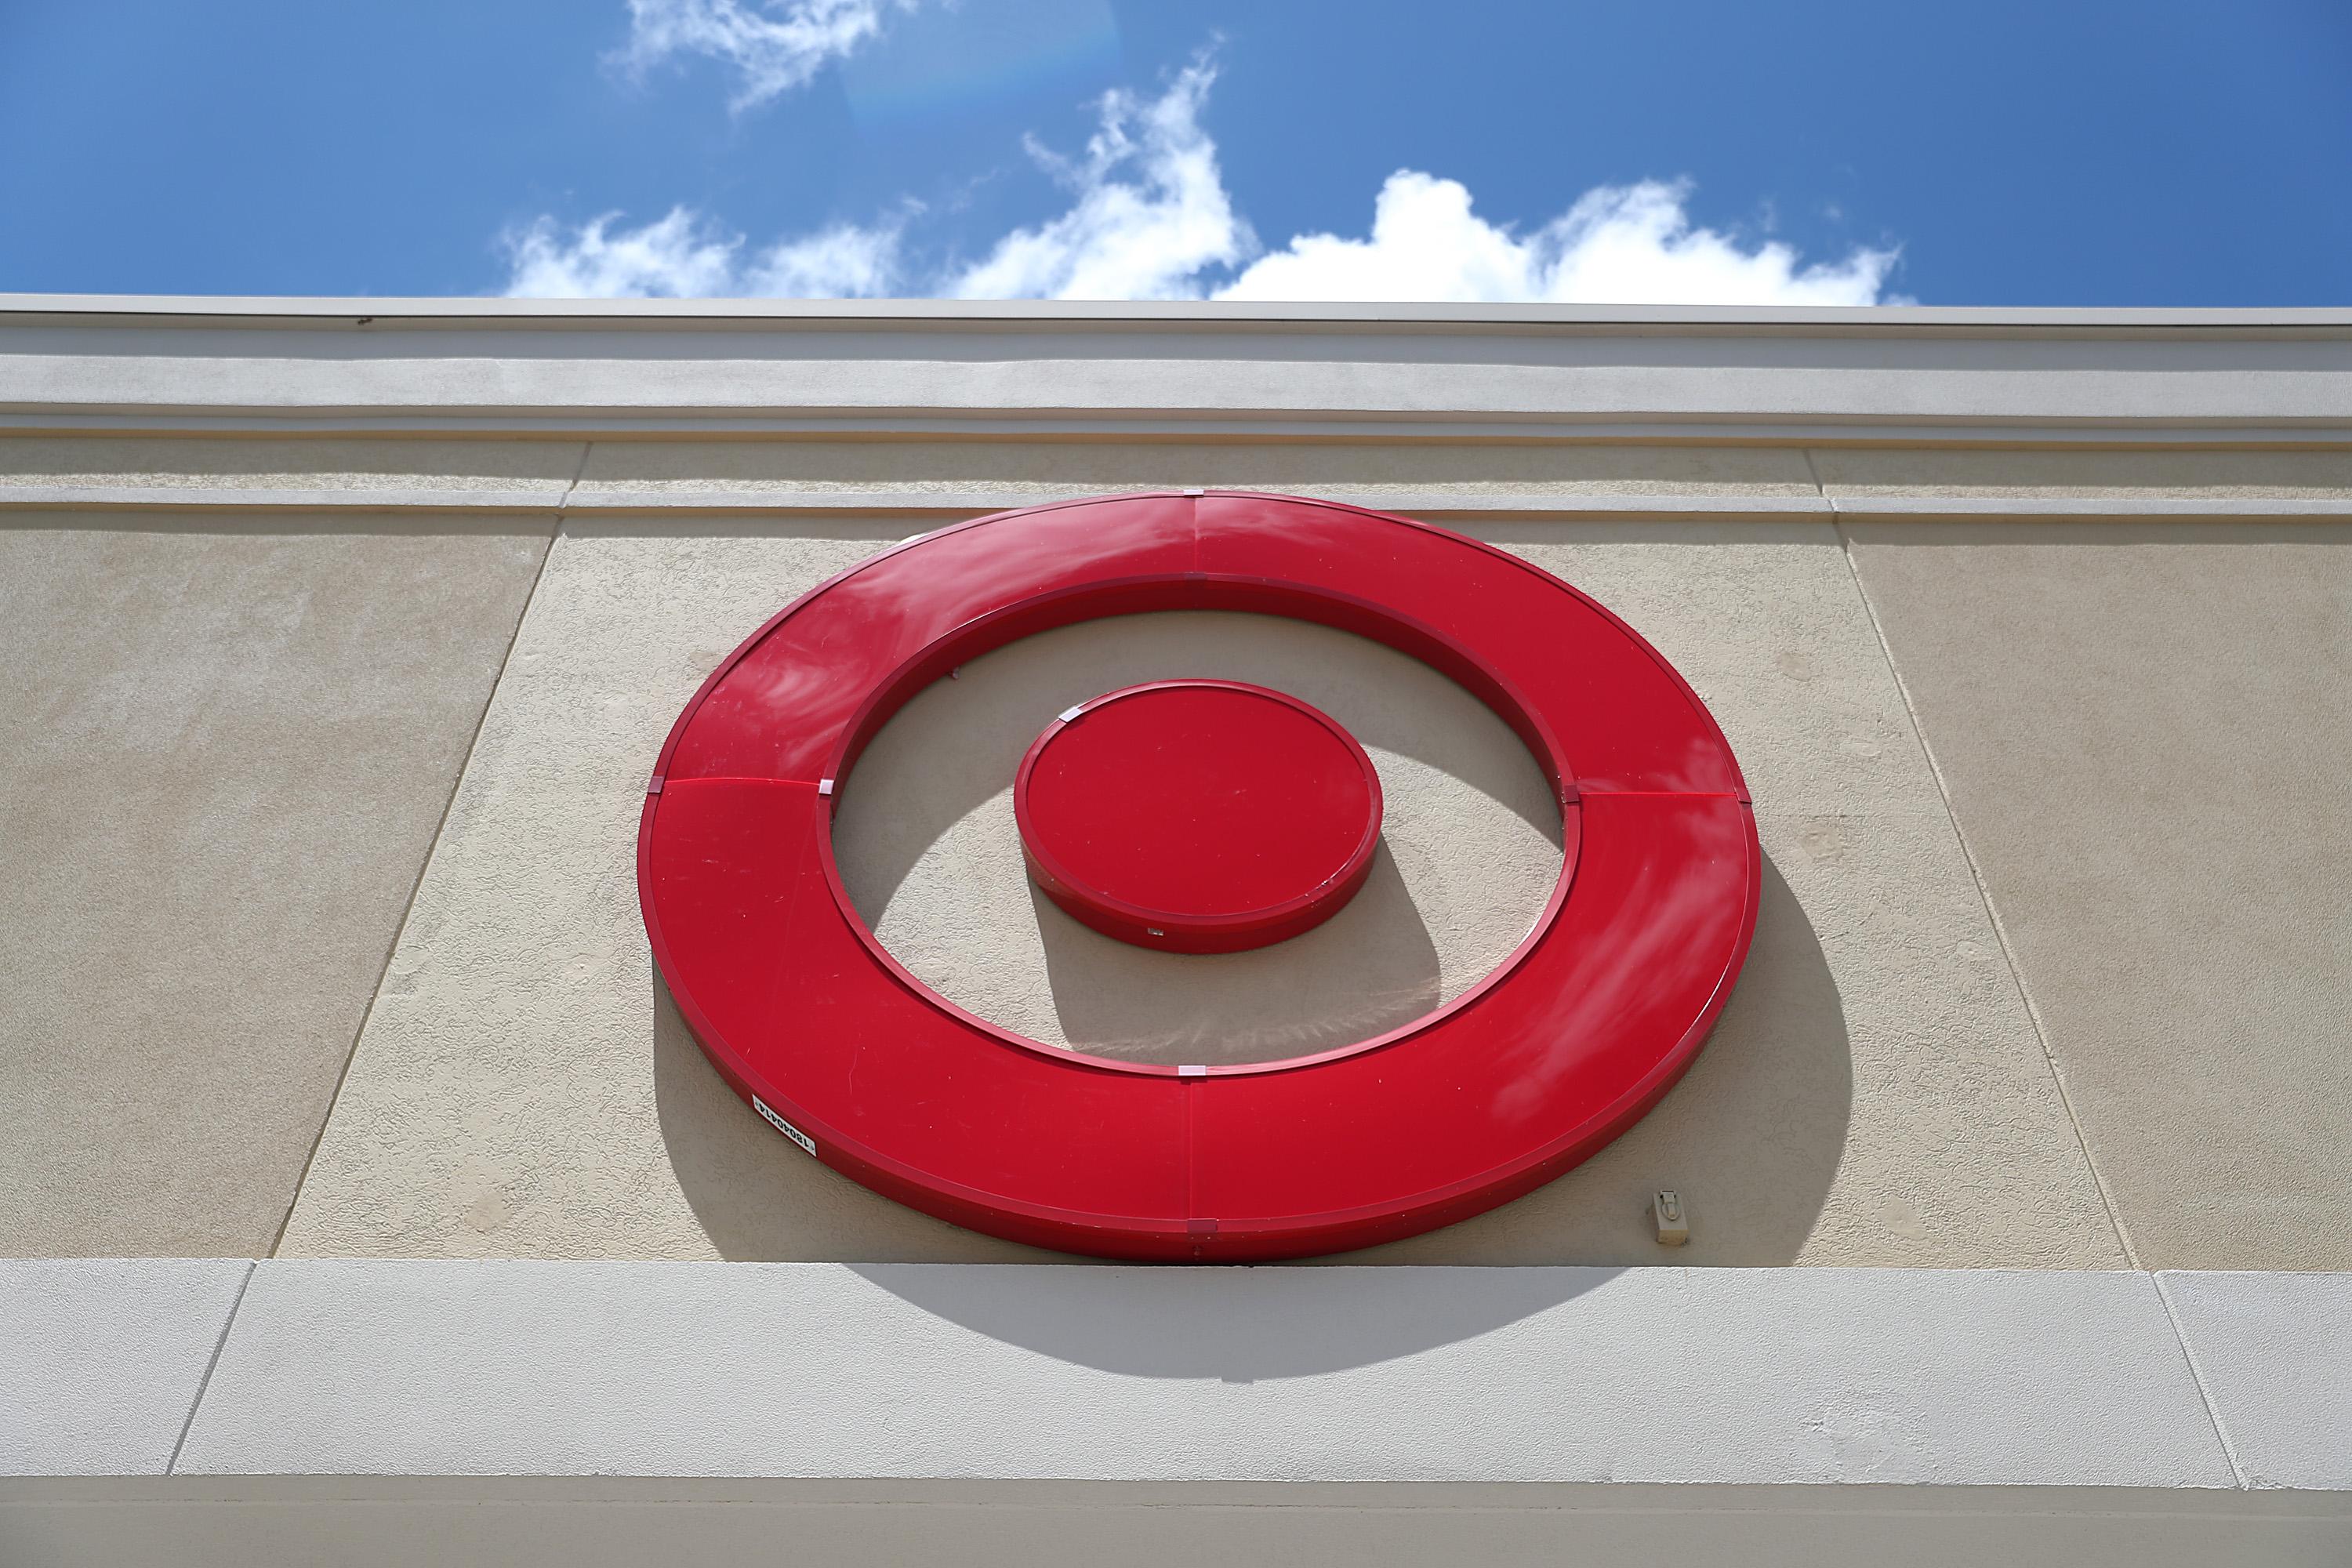 The bull’s-eye logo of a Target store's sign, with a blue sky behind it.